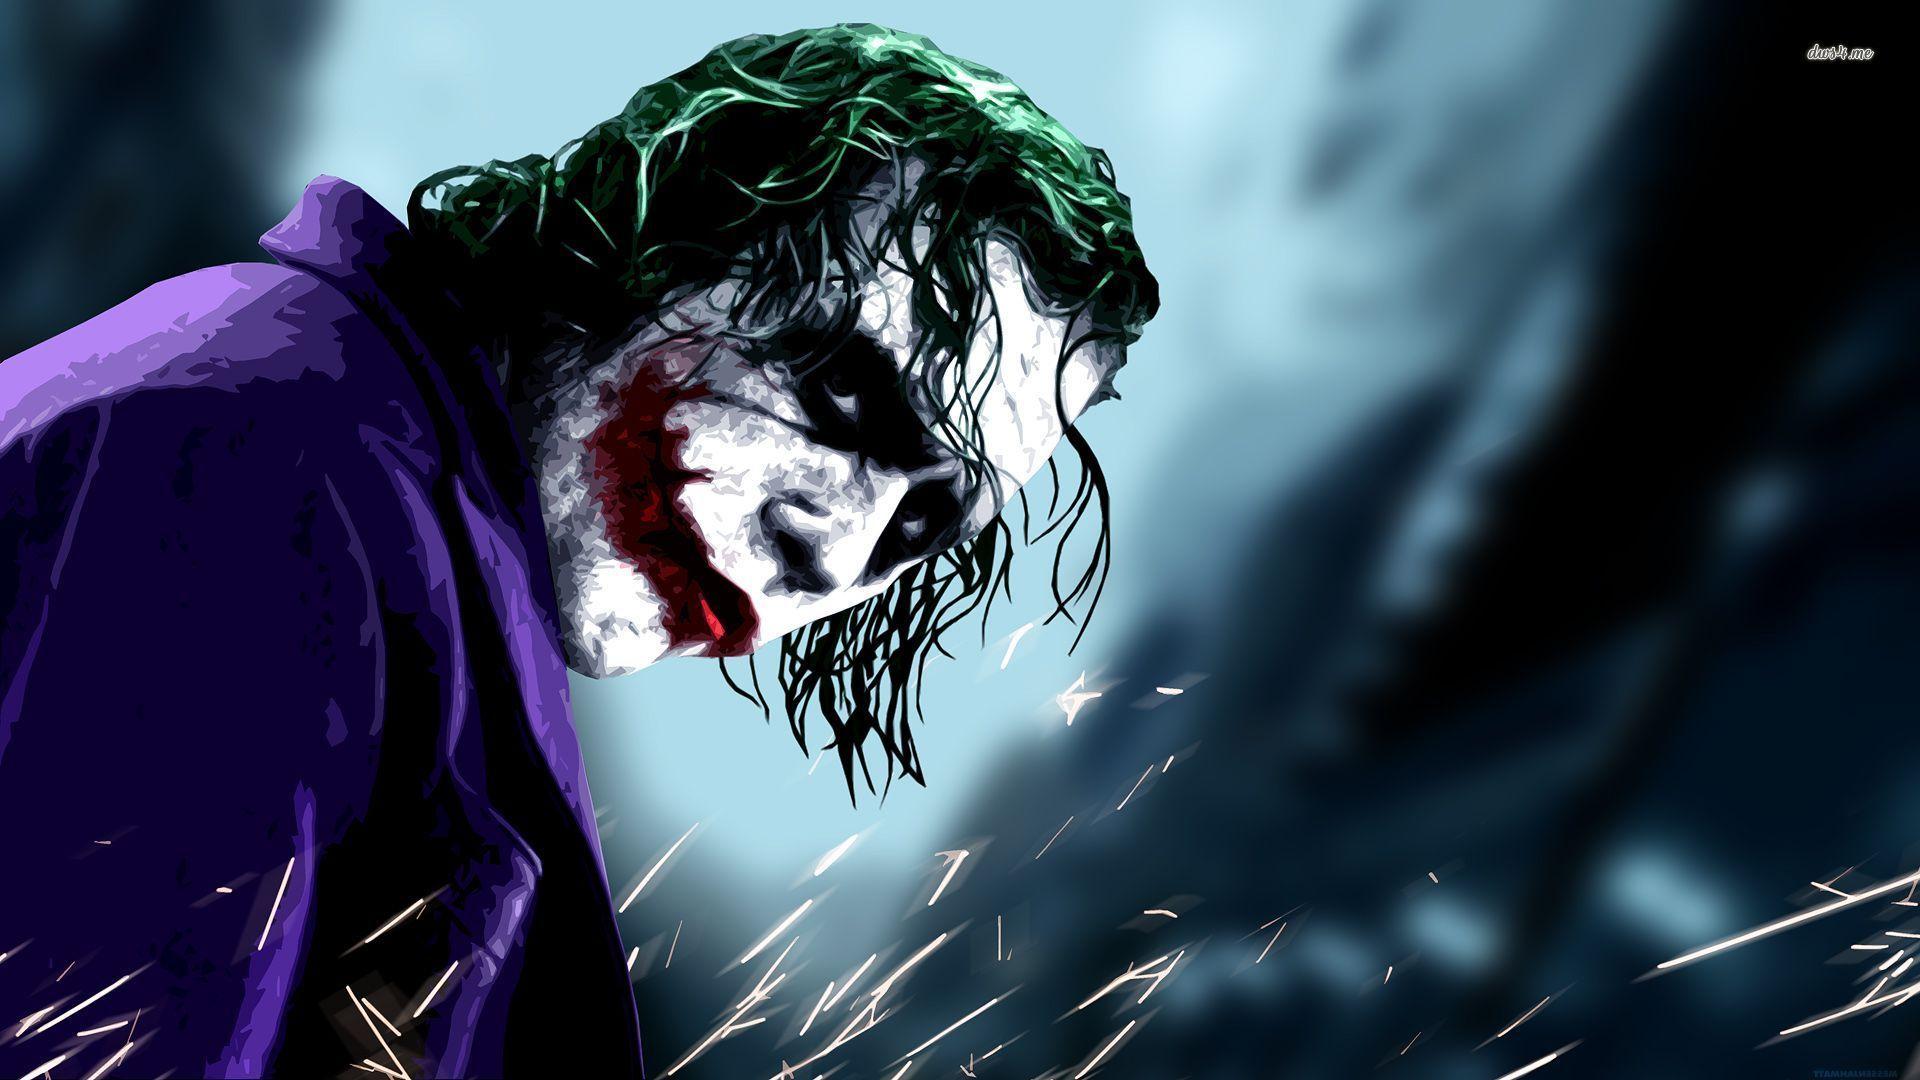 Joker Attitude Wallpapers Wallpaper Cave Yeah, we are talking about batman's archenemy, the master criminal, and. joker attitude wallpapers wallpaper cave